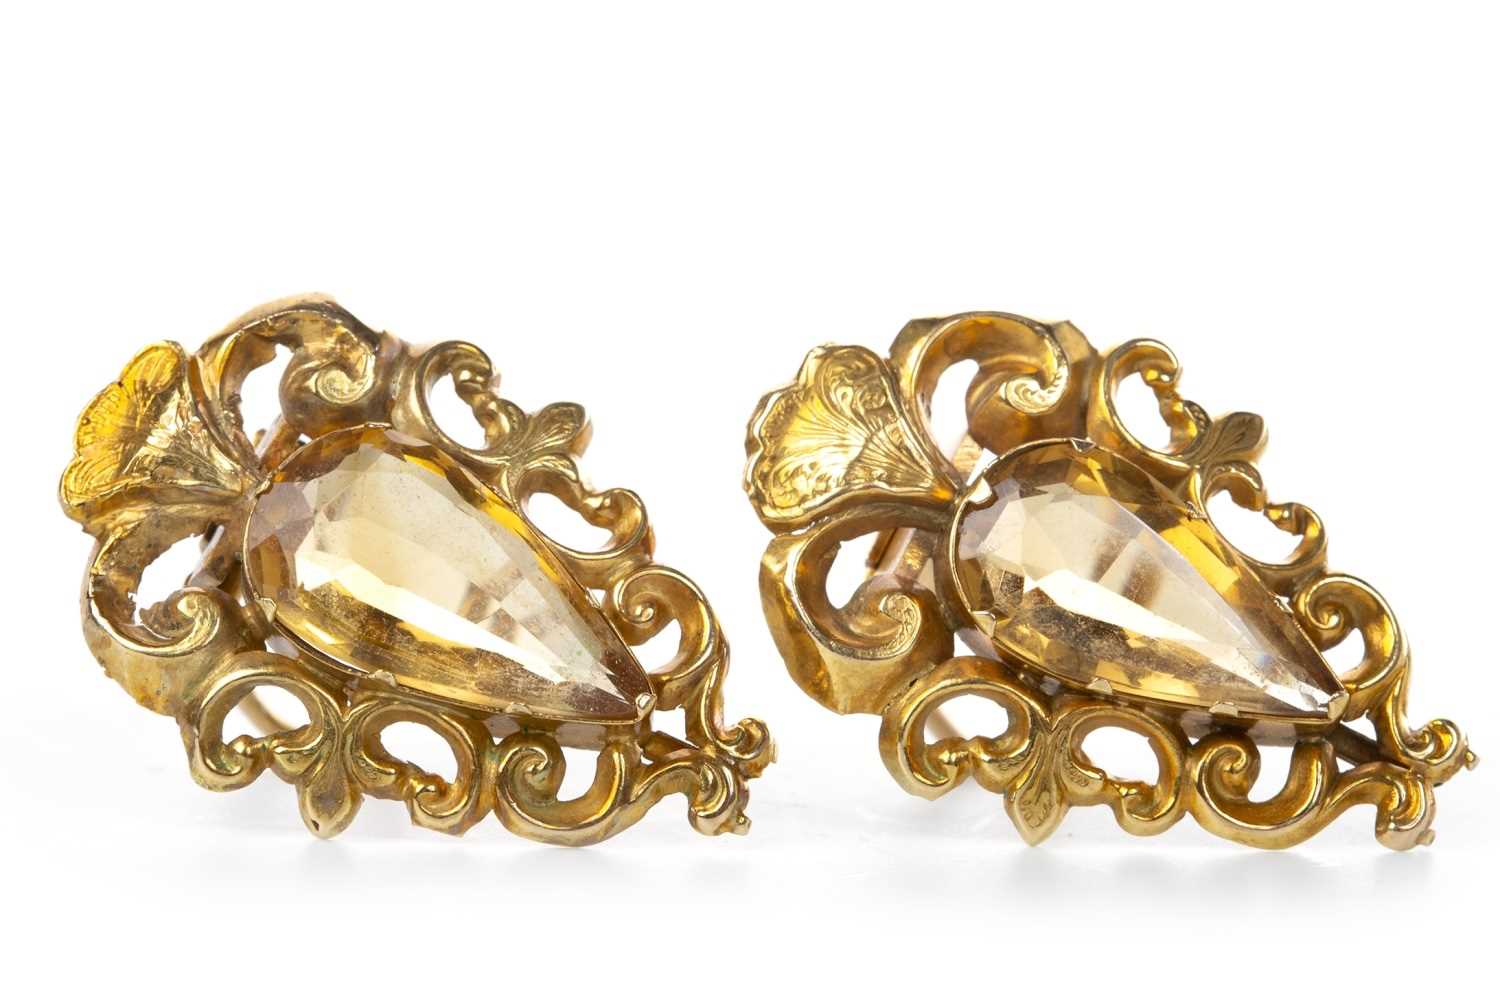 Lot 50 - A PAIR OF CONVERTED VICTORIAN EARRINGS